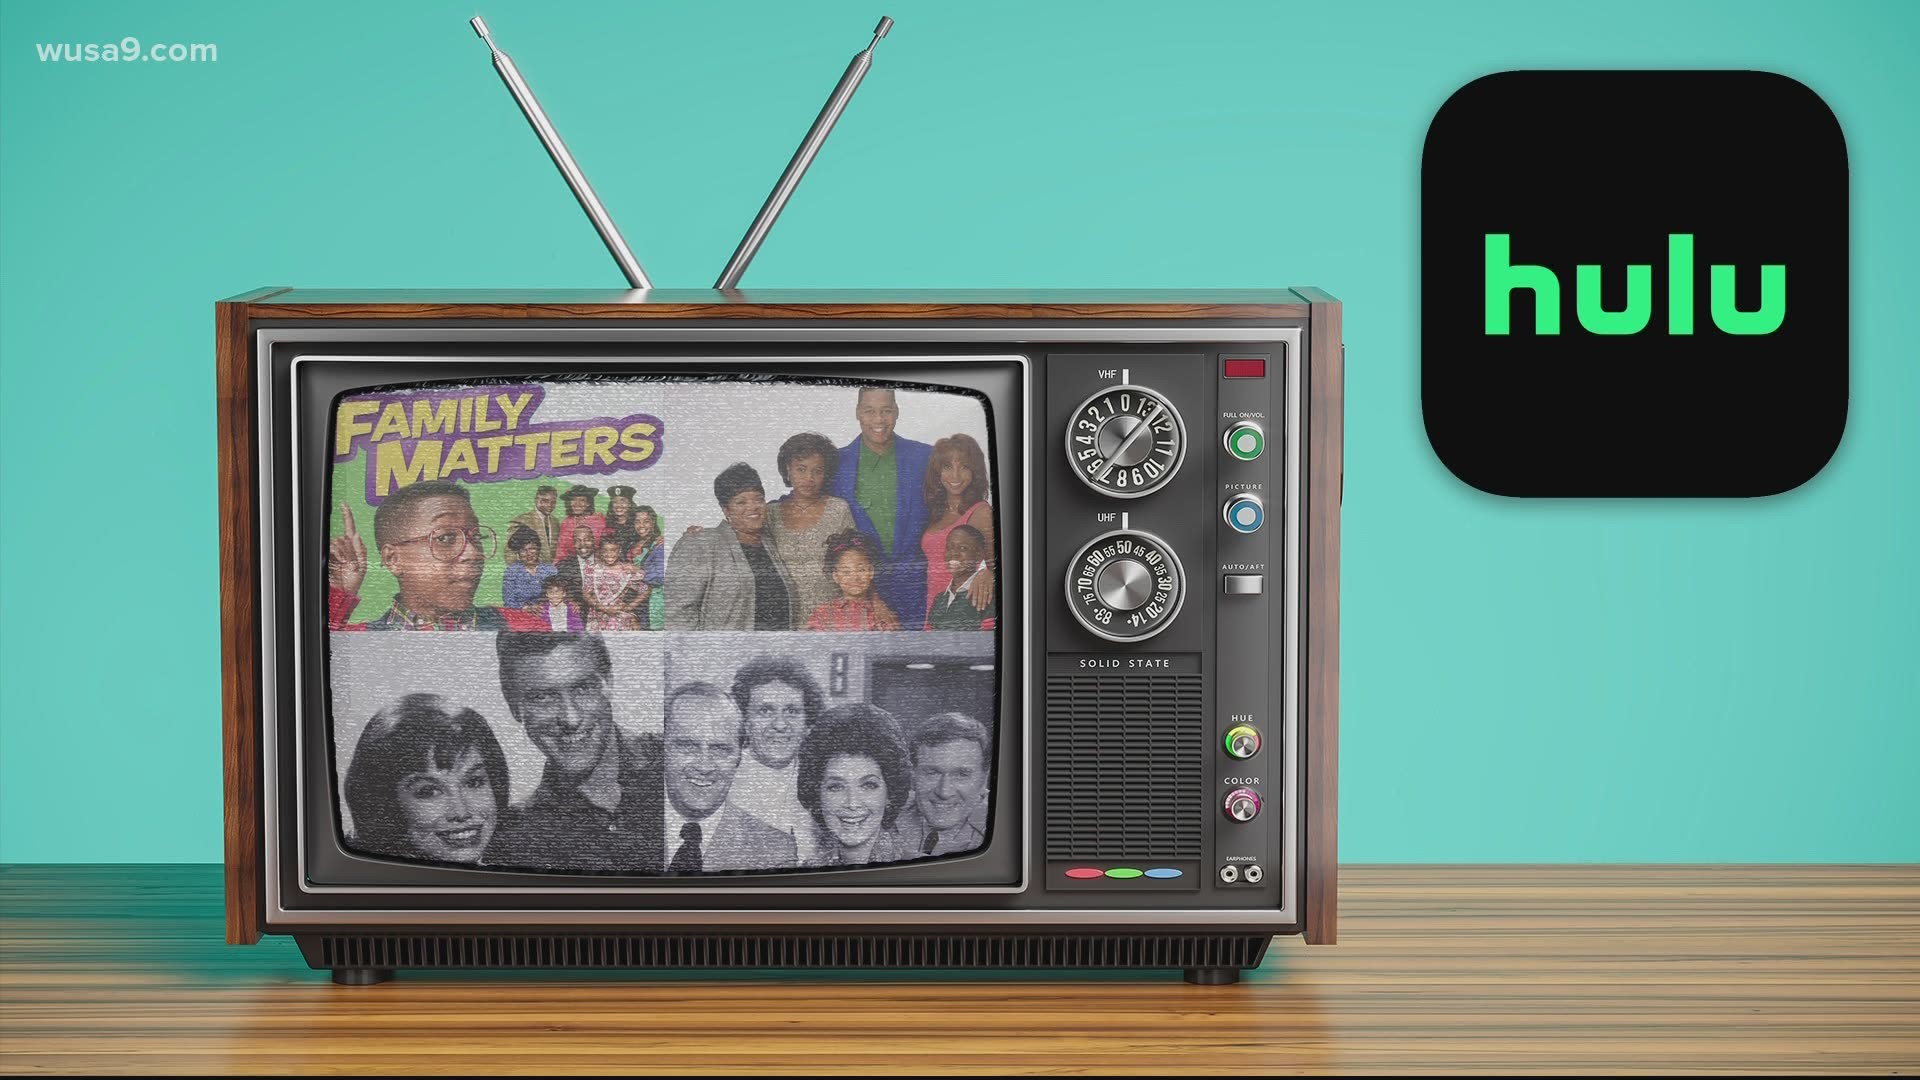 Looking for some really old TV to stream this weekend? Here are your power rankings.